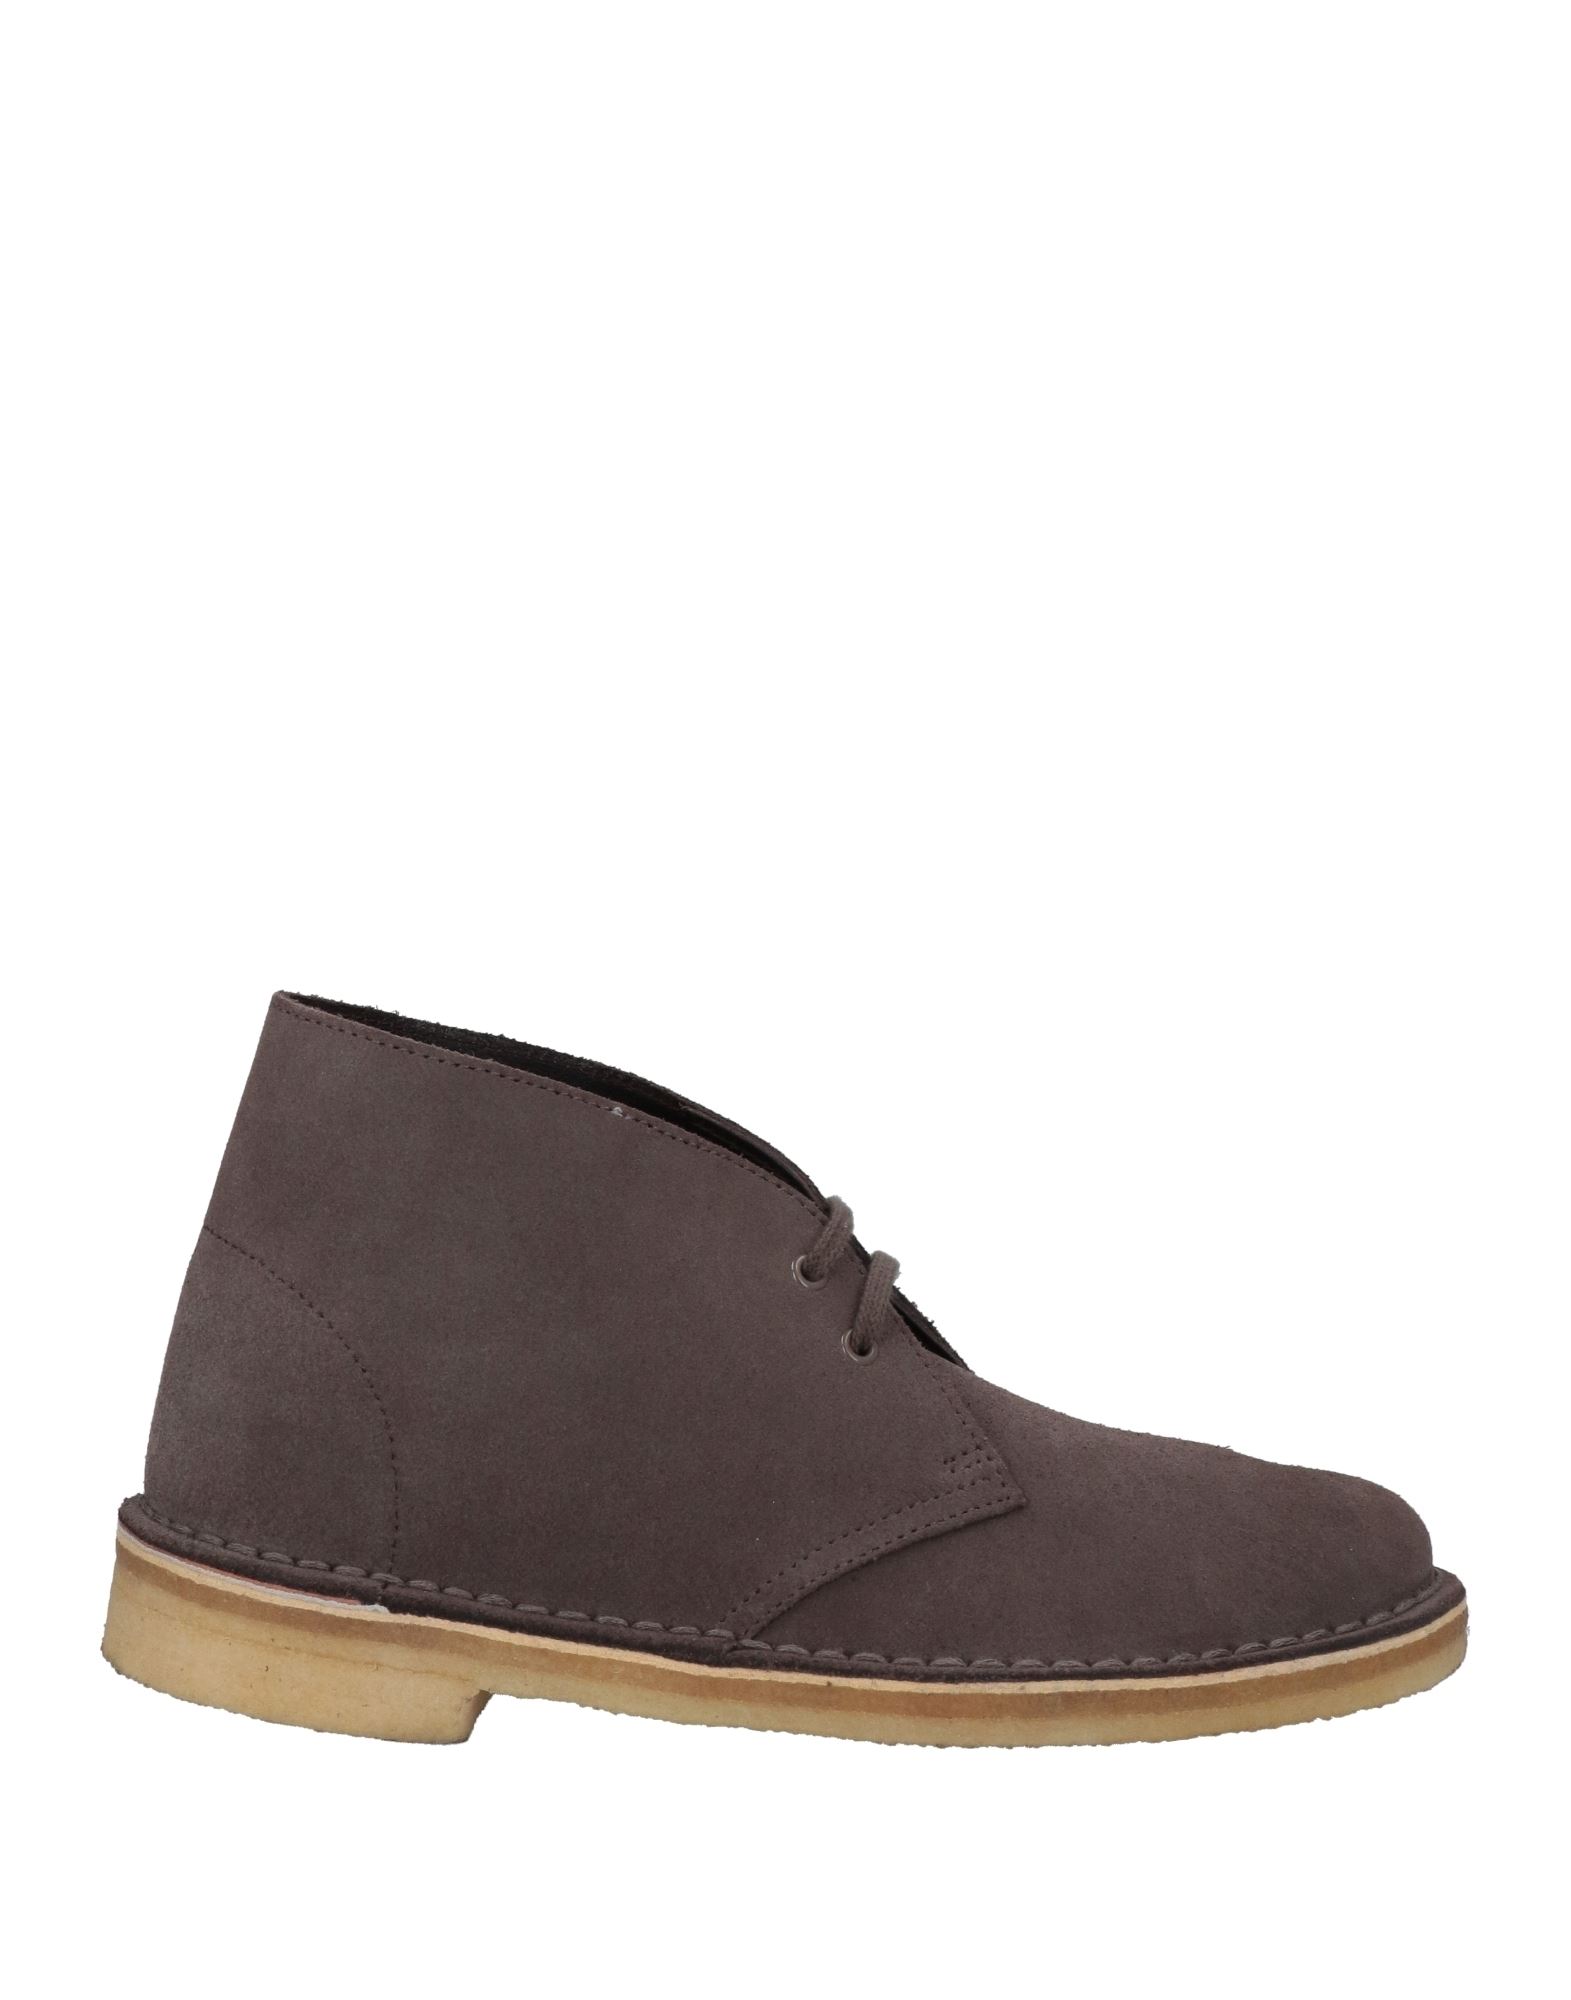 Clarks Originals Ankle Boots In Brown